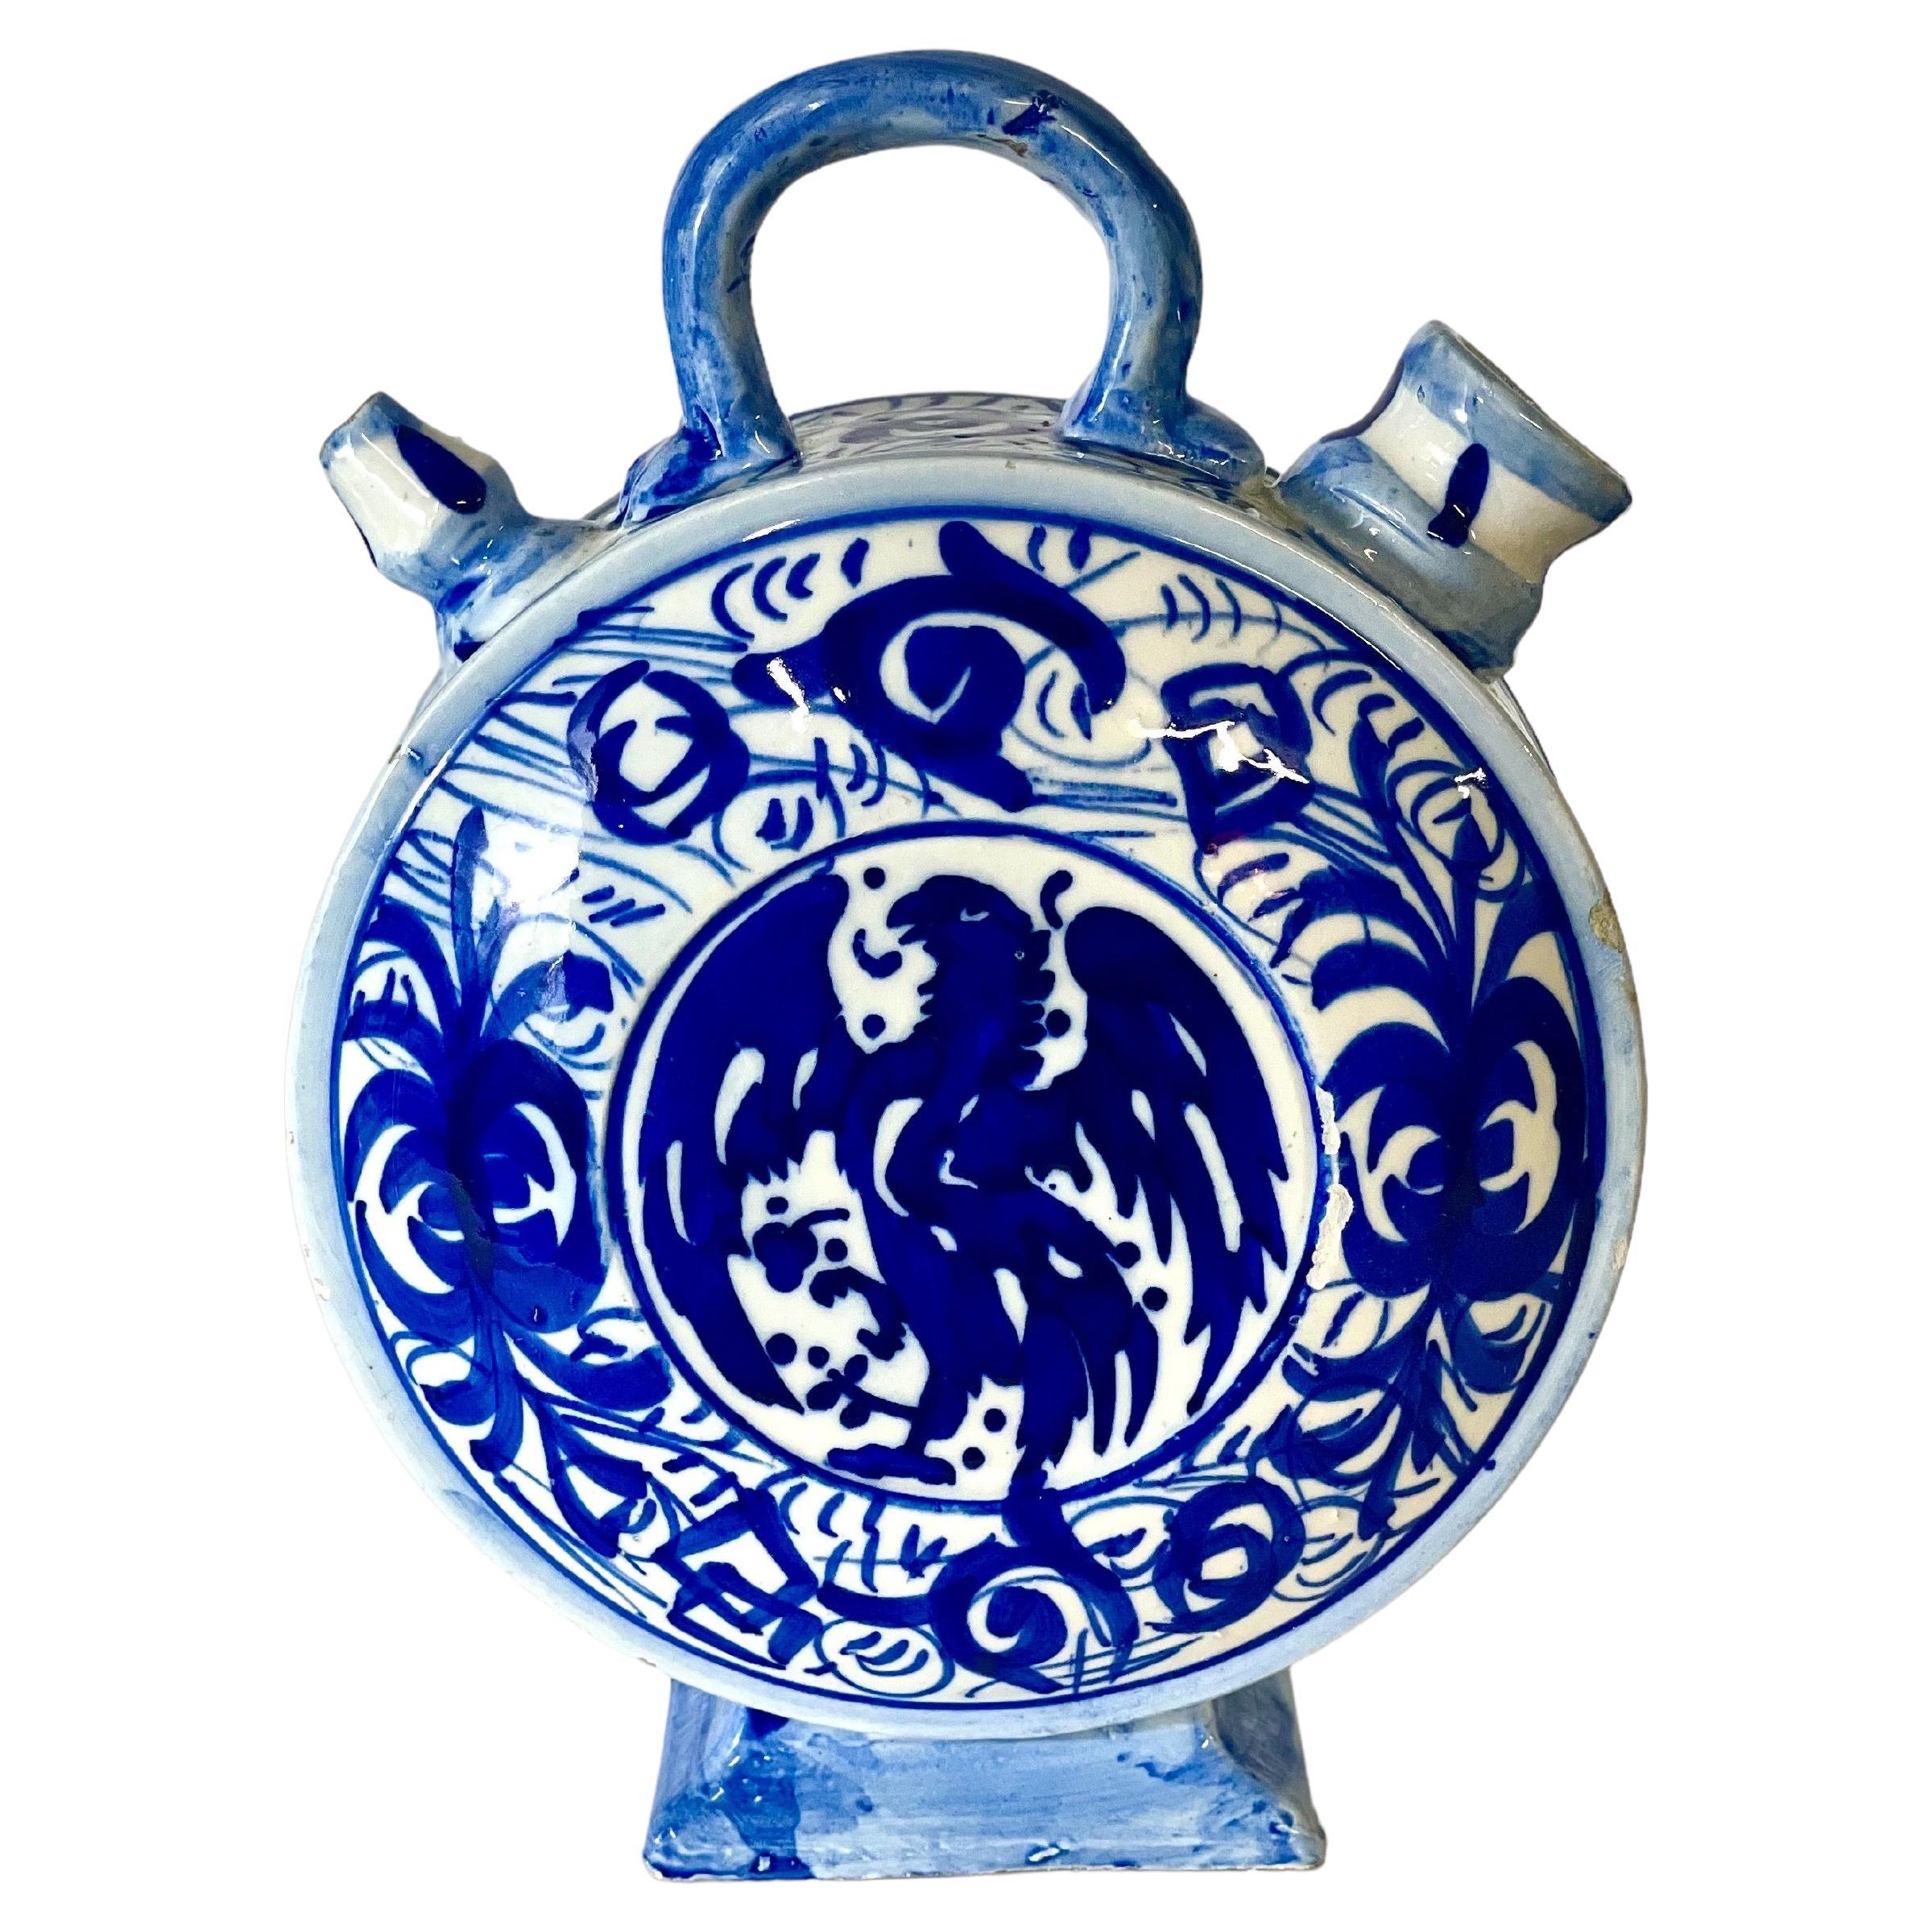  Blue and White Moon Shaped  Earthenware Chevrette or French Water Pitcher For Sale